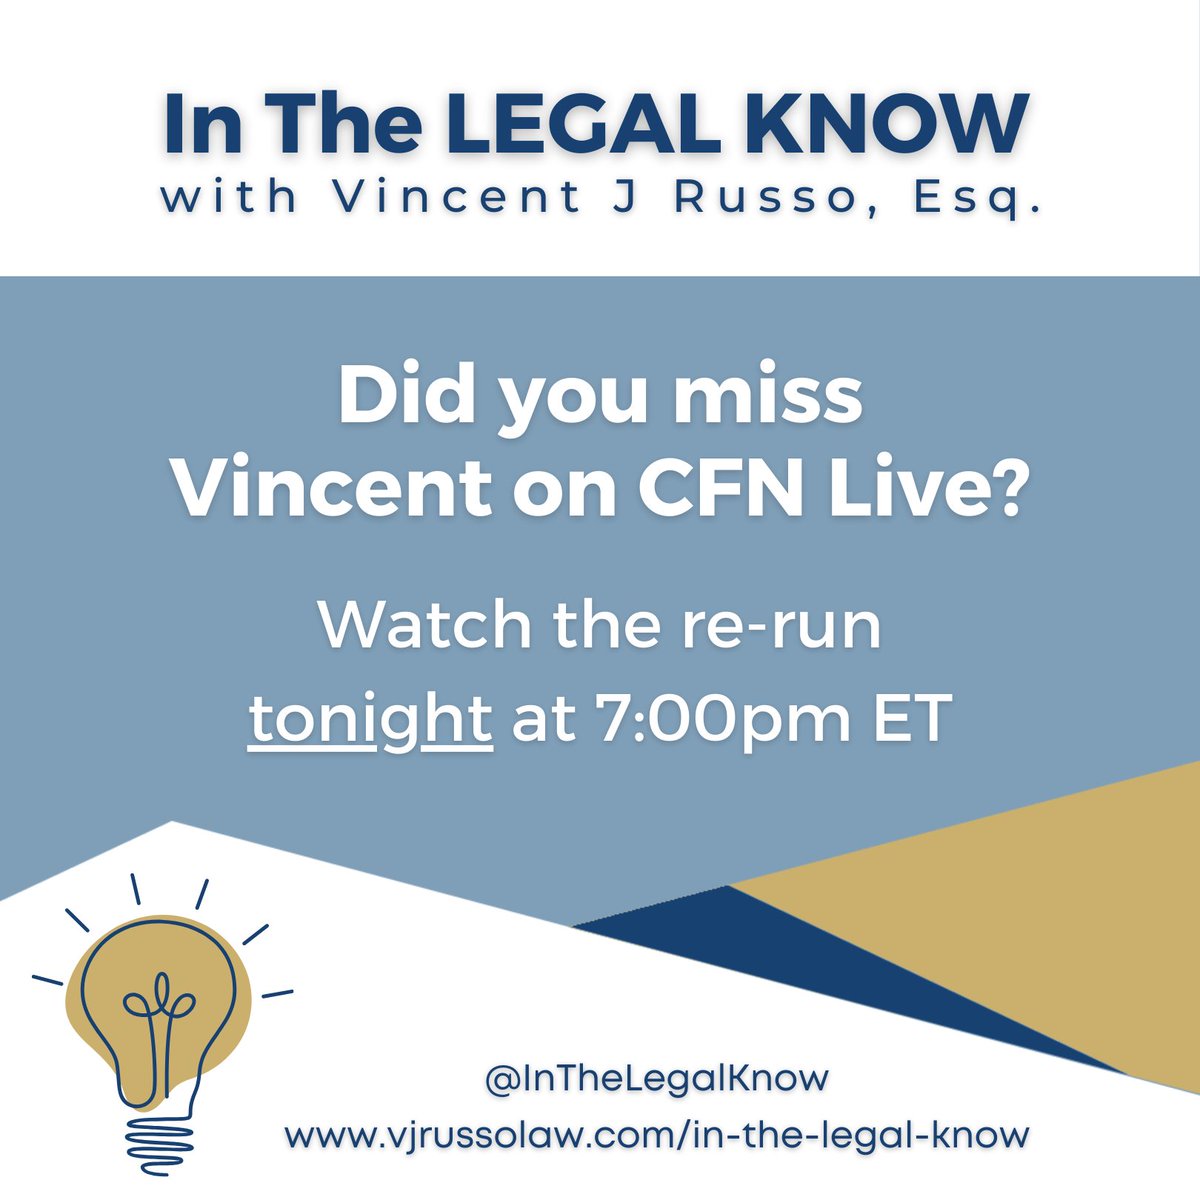 Did you catch “In The Legal Know” this morning? Watch the re-run at 7pm ET tonight as he discusses how to plan for your pet after you die and the pros and cons of a Pet Trust. #russolawgroup #inthelegalknow #CFNLive #pettrust #estateplanningtips #estateplan #petlover